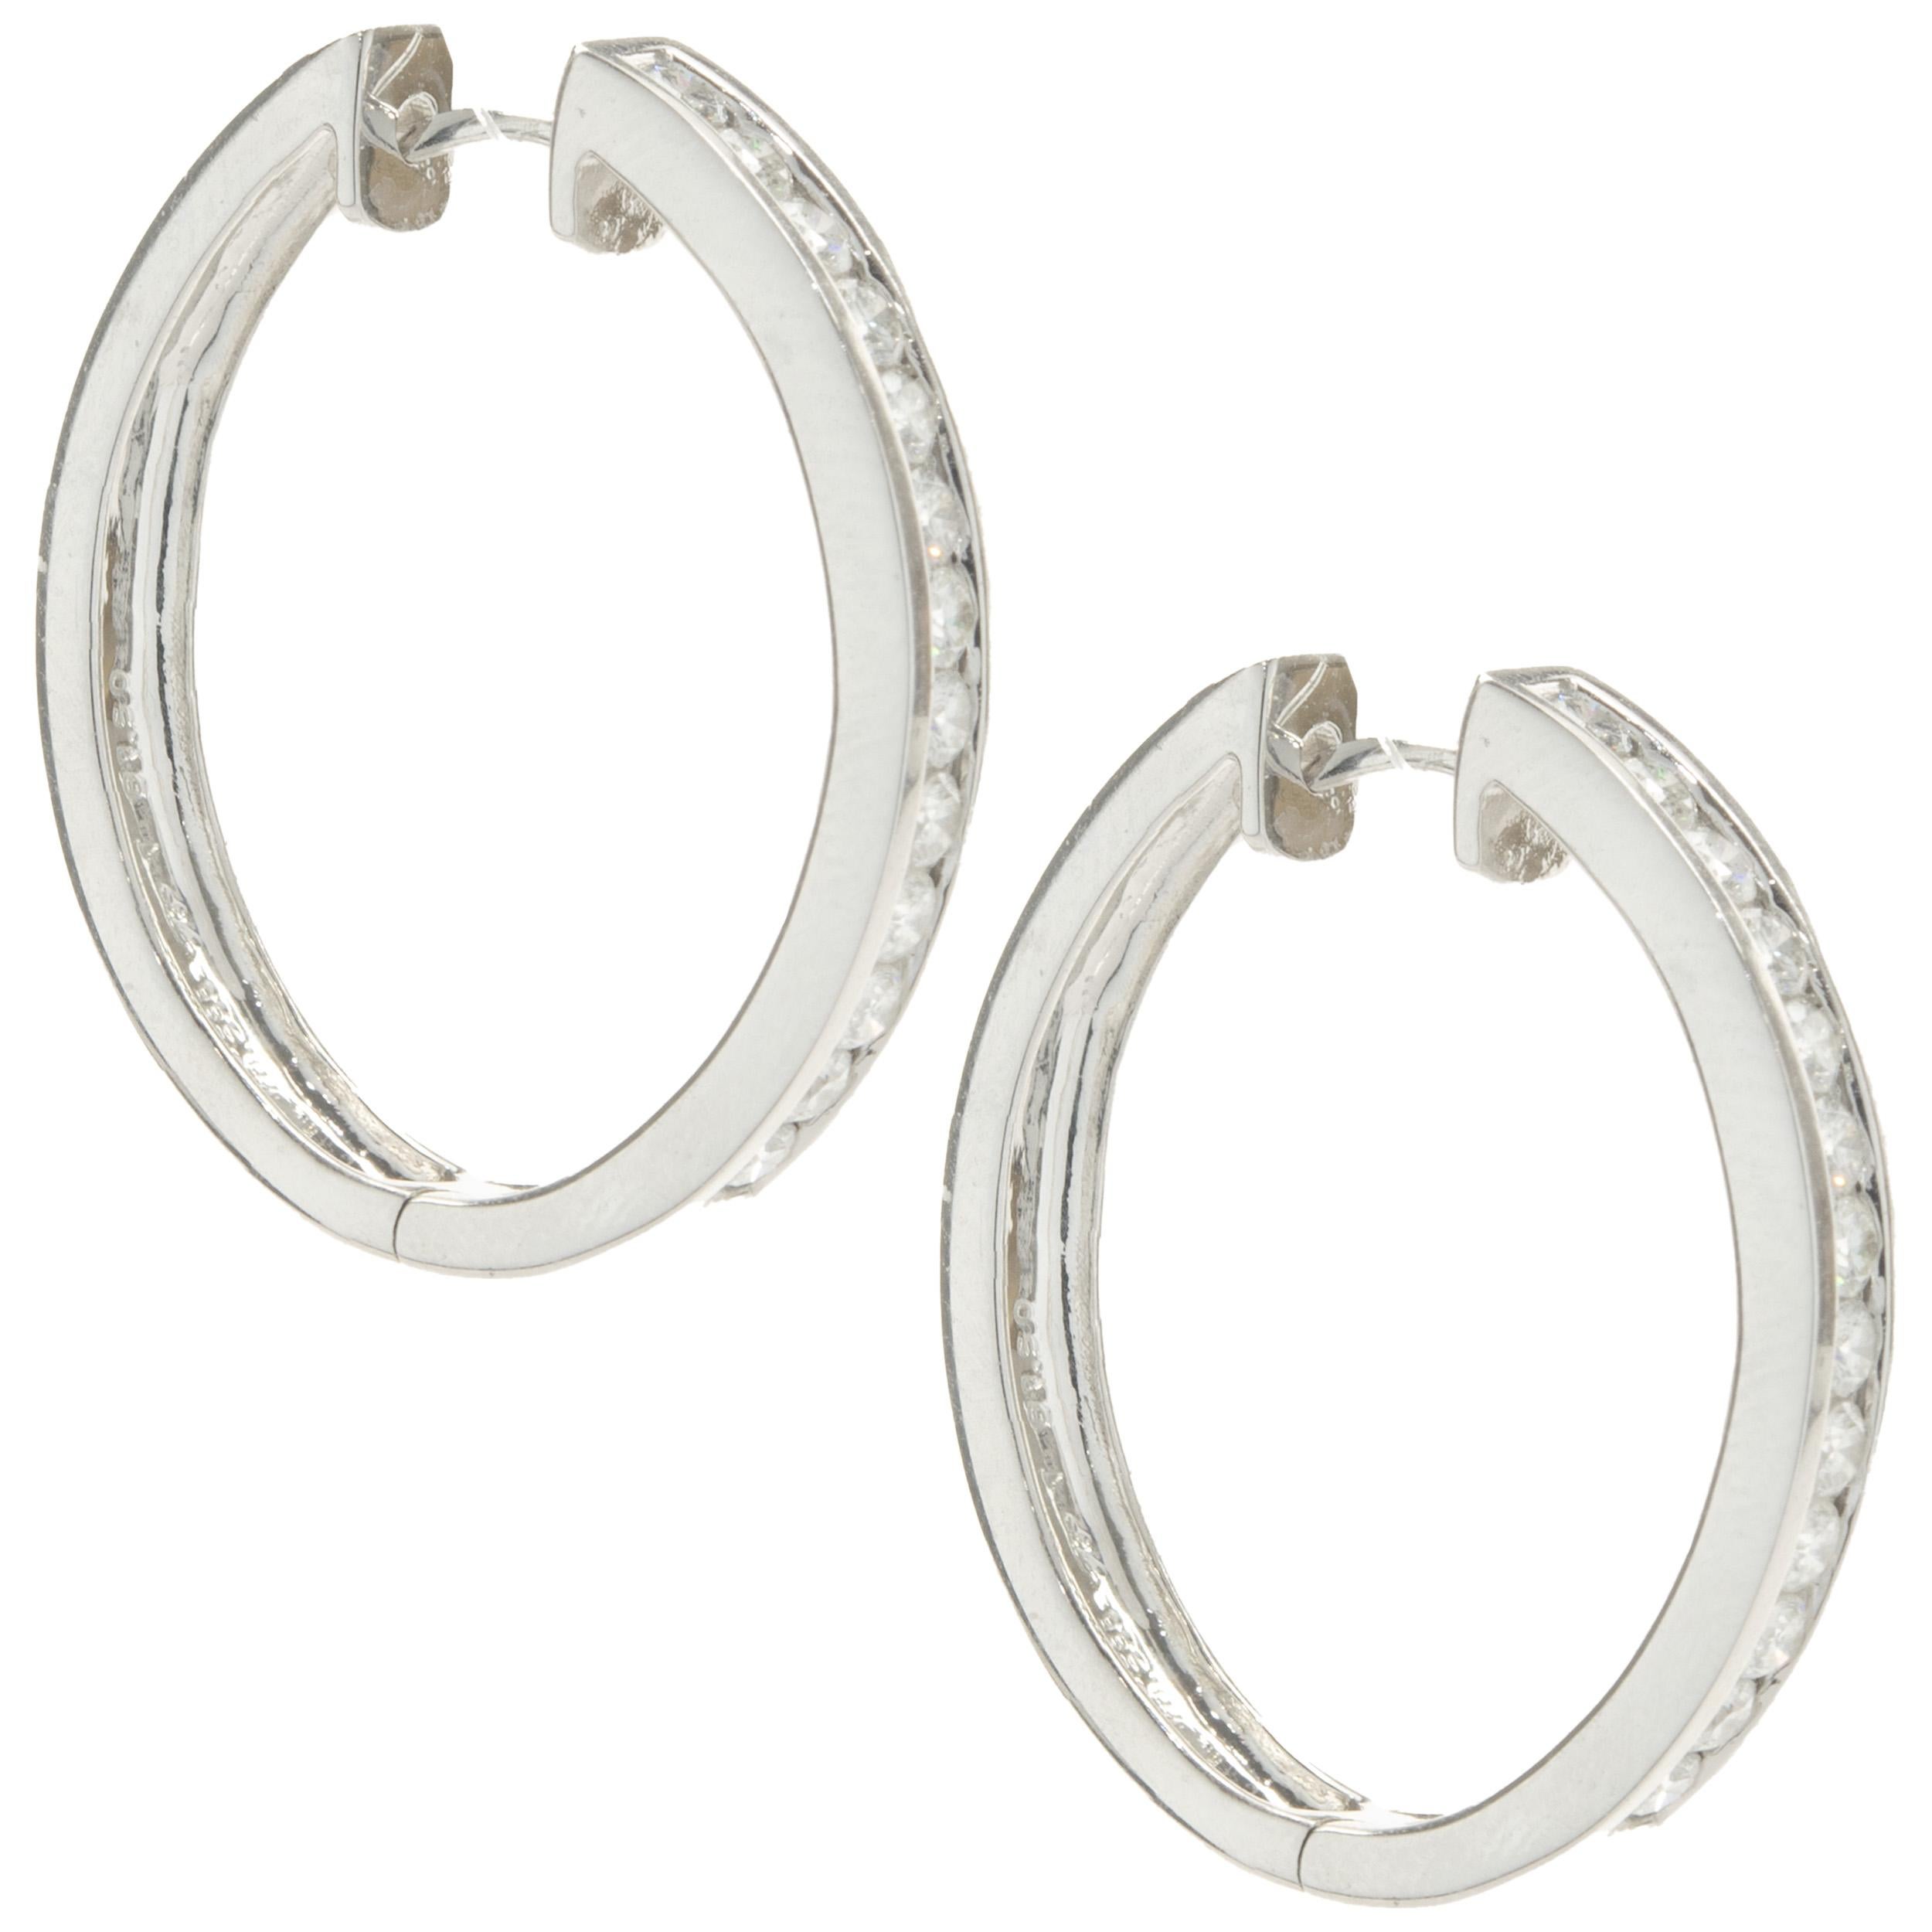 Designer: custom design
Material: 14K white gold
Diamonds: 26 round brilliant cut= 1.50cttw
Color: G
Clarity: SI1
Dimensions: earrings measure 32mm long
Weight: 13.59 grams